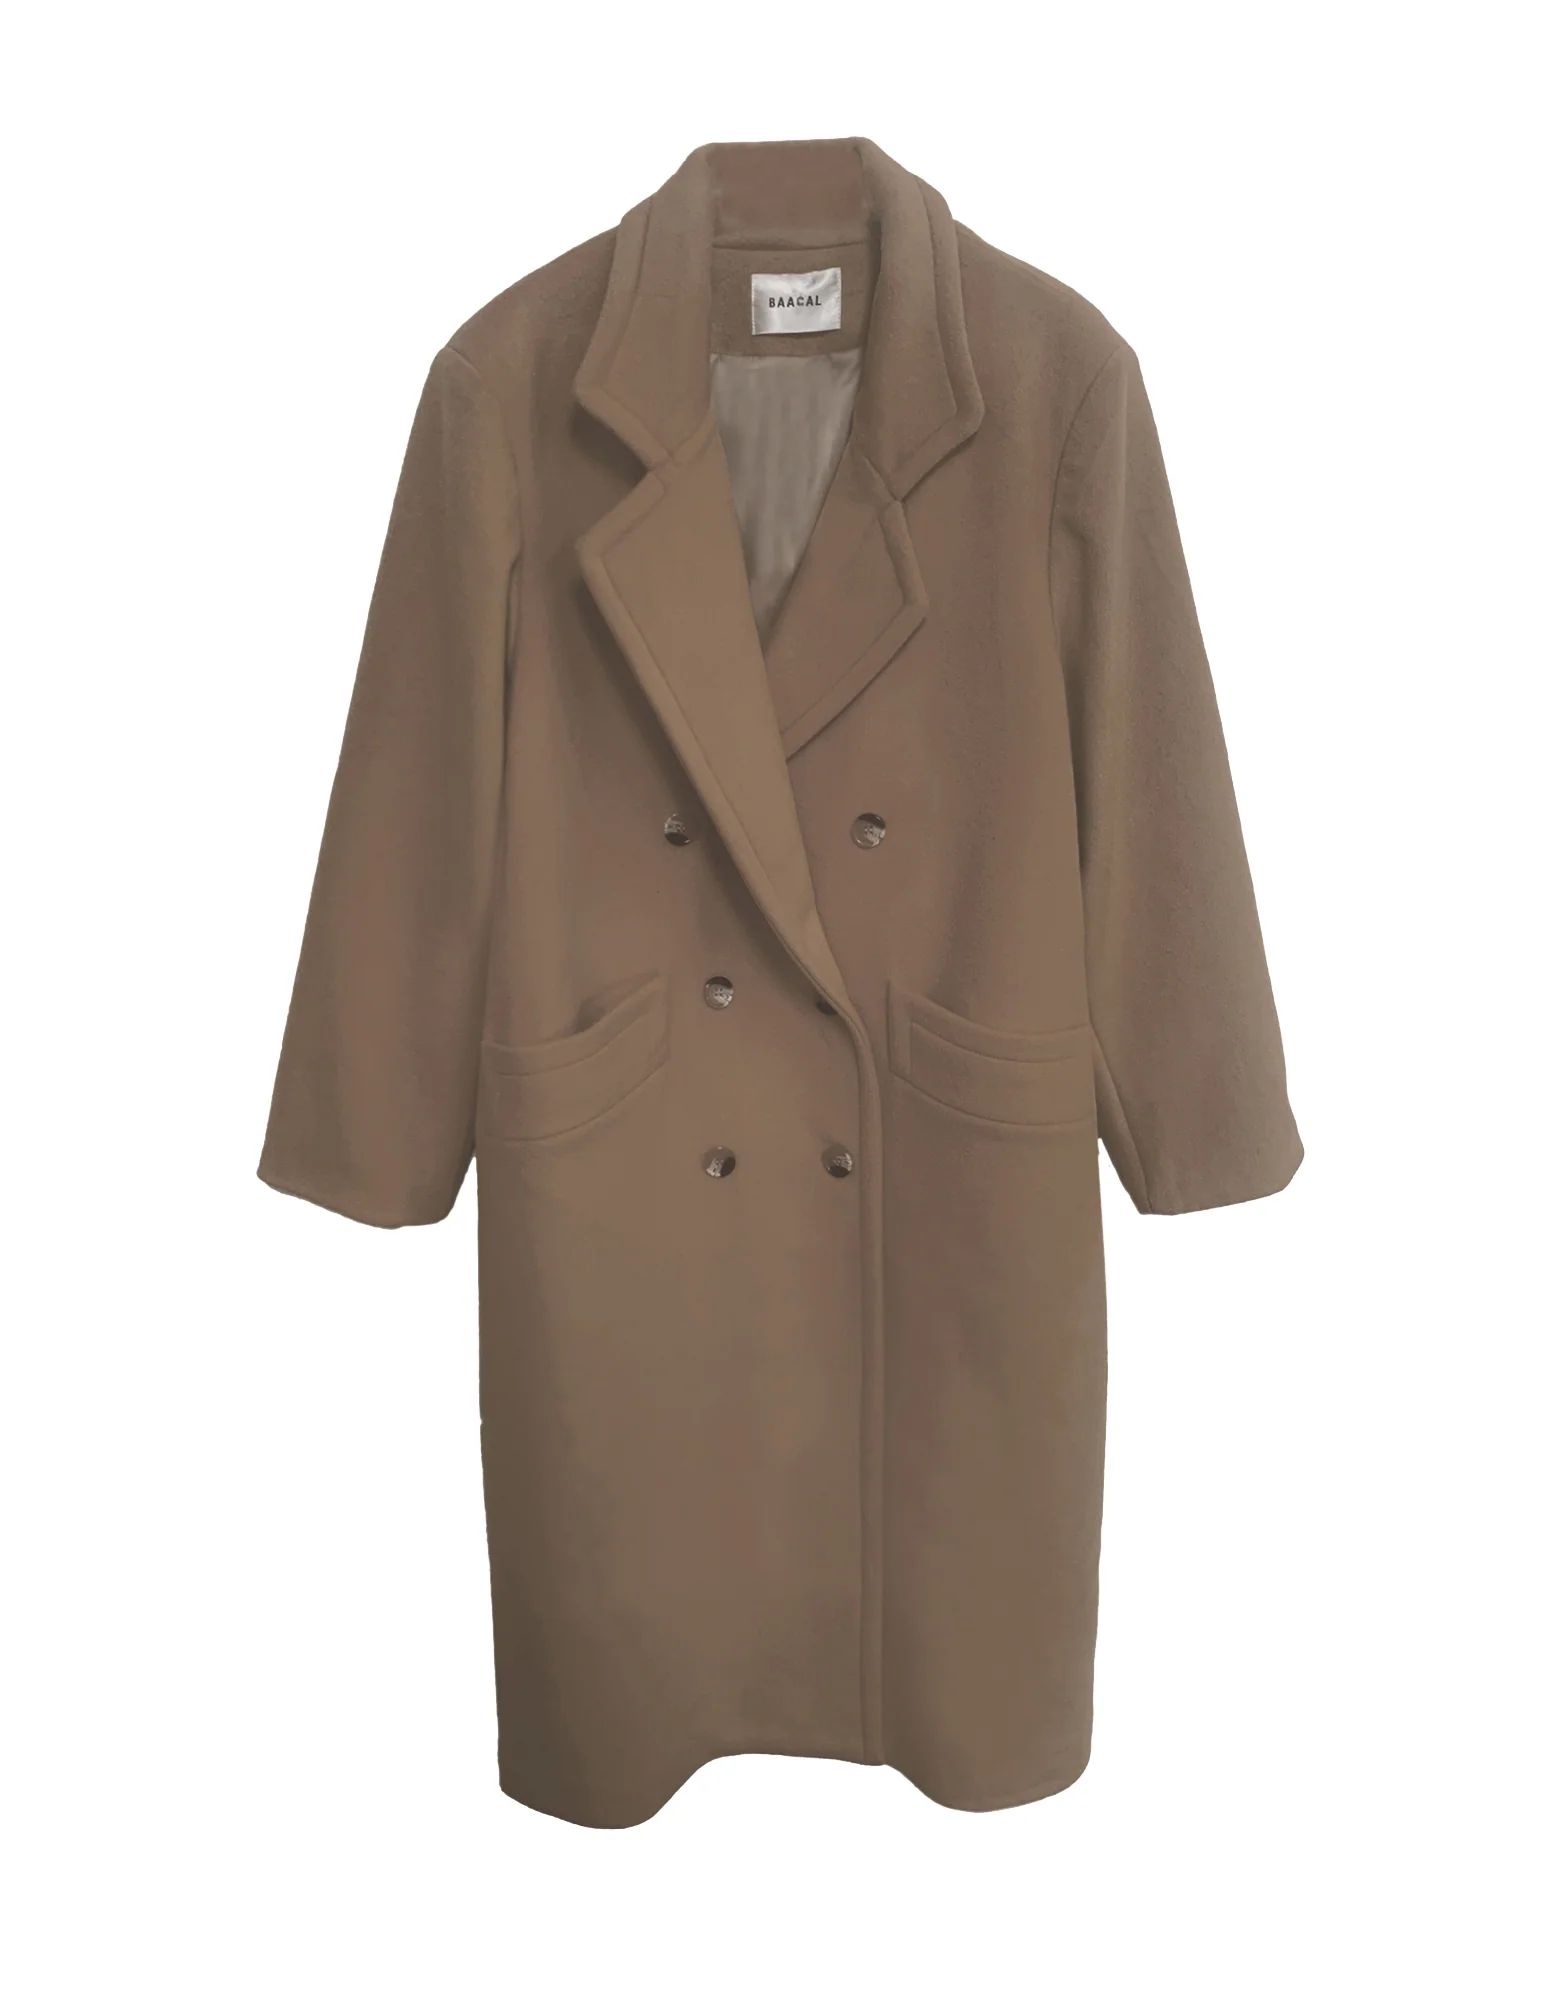 Double Breasted Women's Plus Size soft Camel Car Coat by Cynthia Vincent BAACAL | BAACAL Limited, LLC